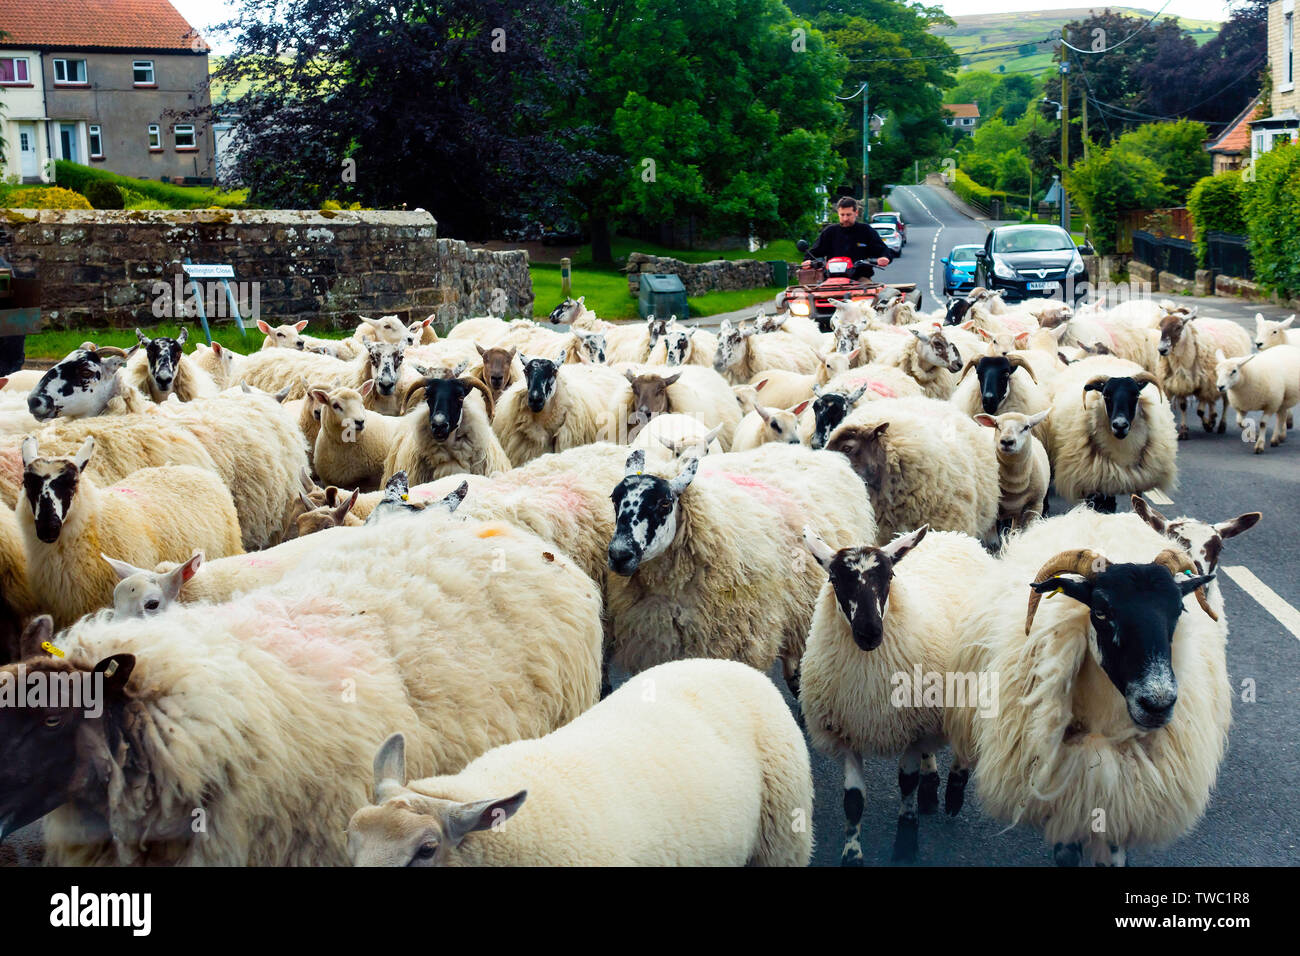 A shepherd riding a quad bike driving a flock of sheep in Danby village in the North Yorkshire Moors Stock Photo